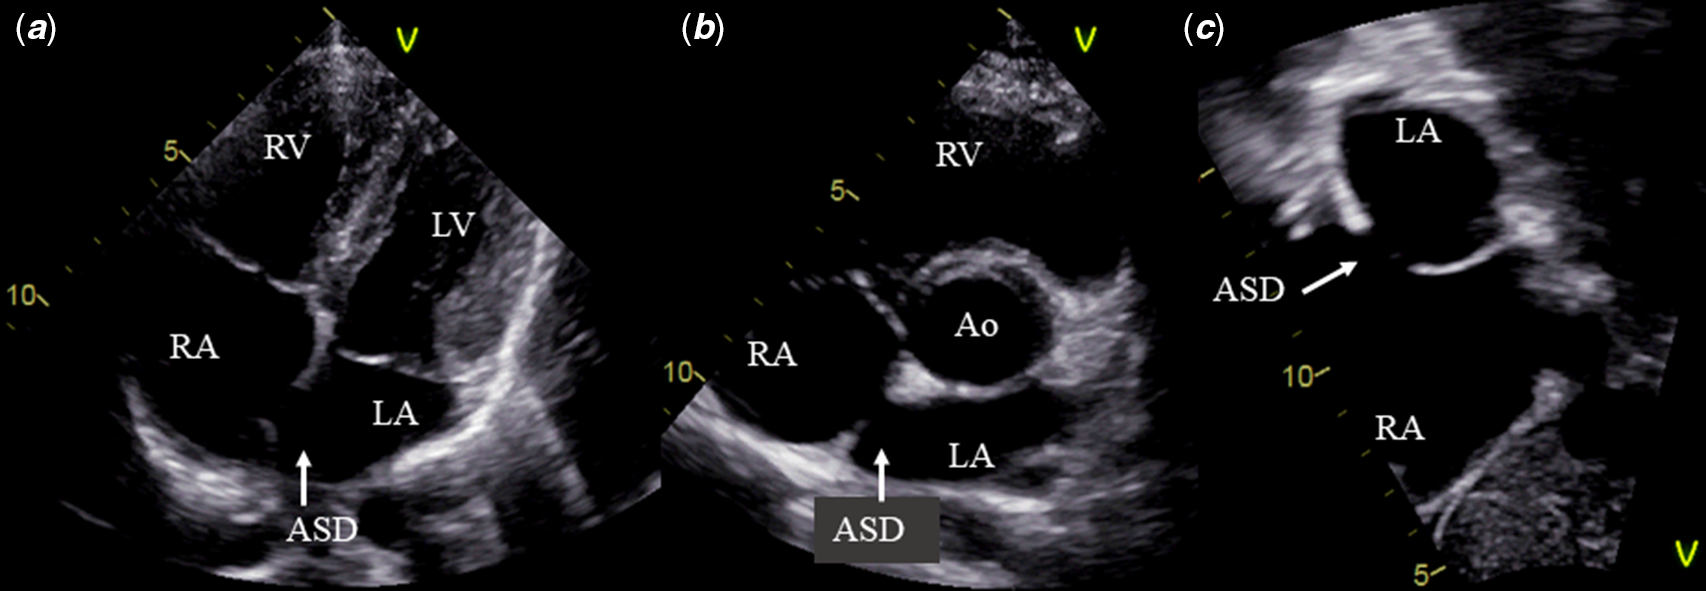 Crochetage' sign on ECG in secundum ASD: clinical significance